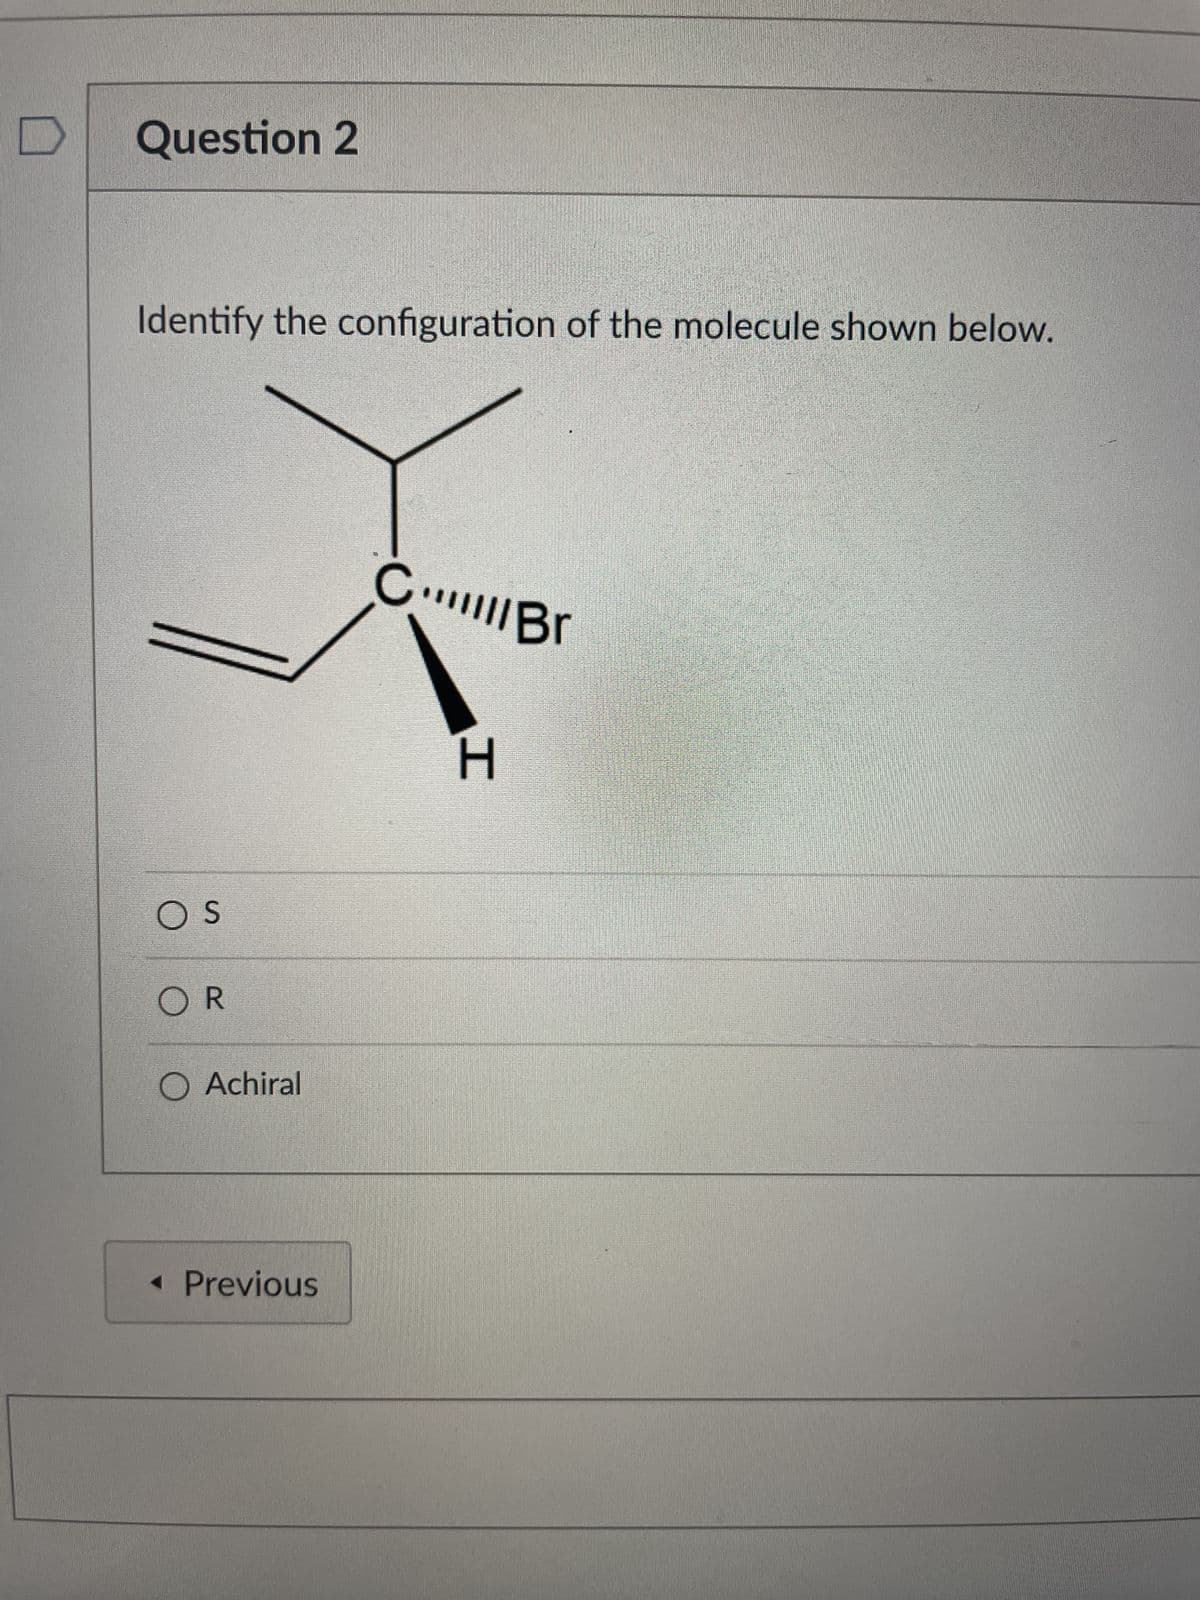 Question 2
Identify the configuration of the molecule shown below.
CBr
H
OS
OR
O Achiral
A
< Previous